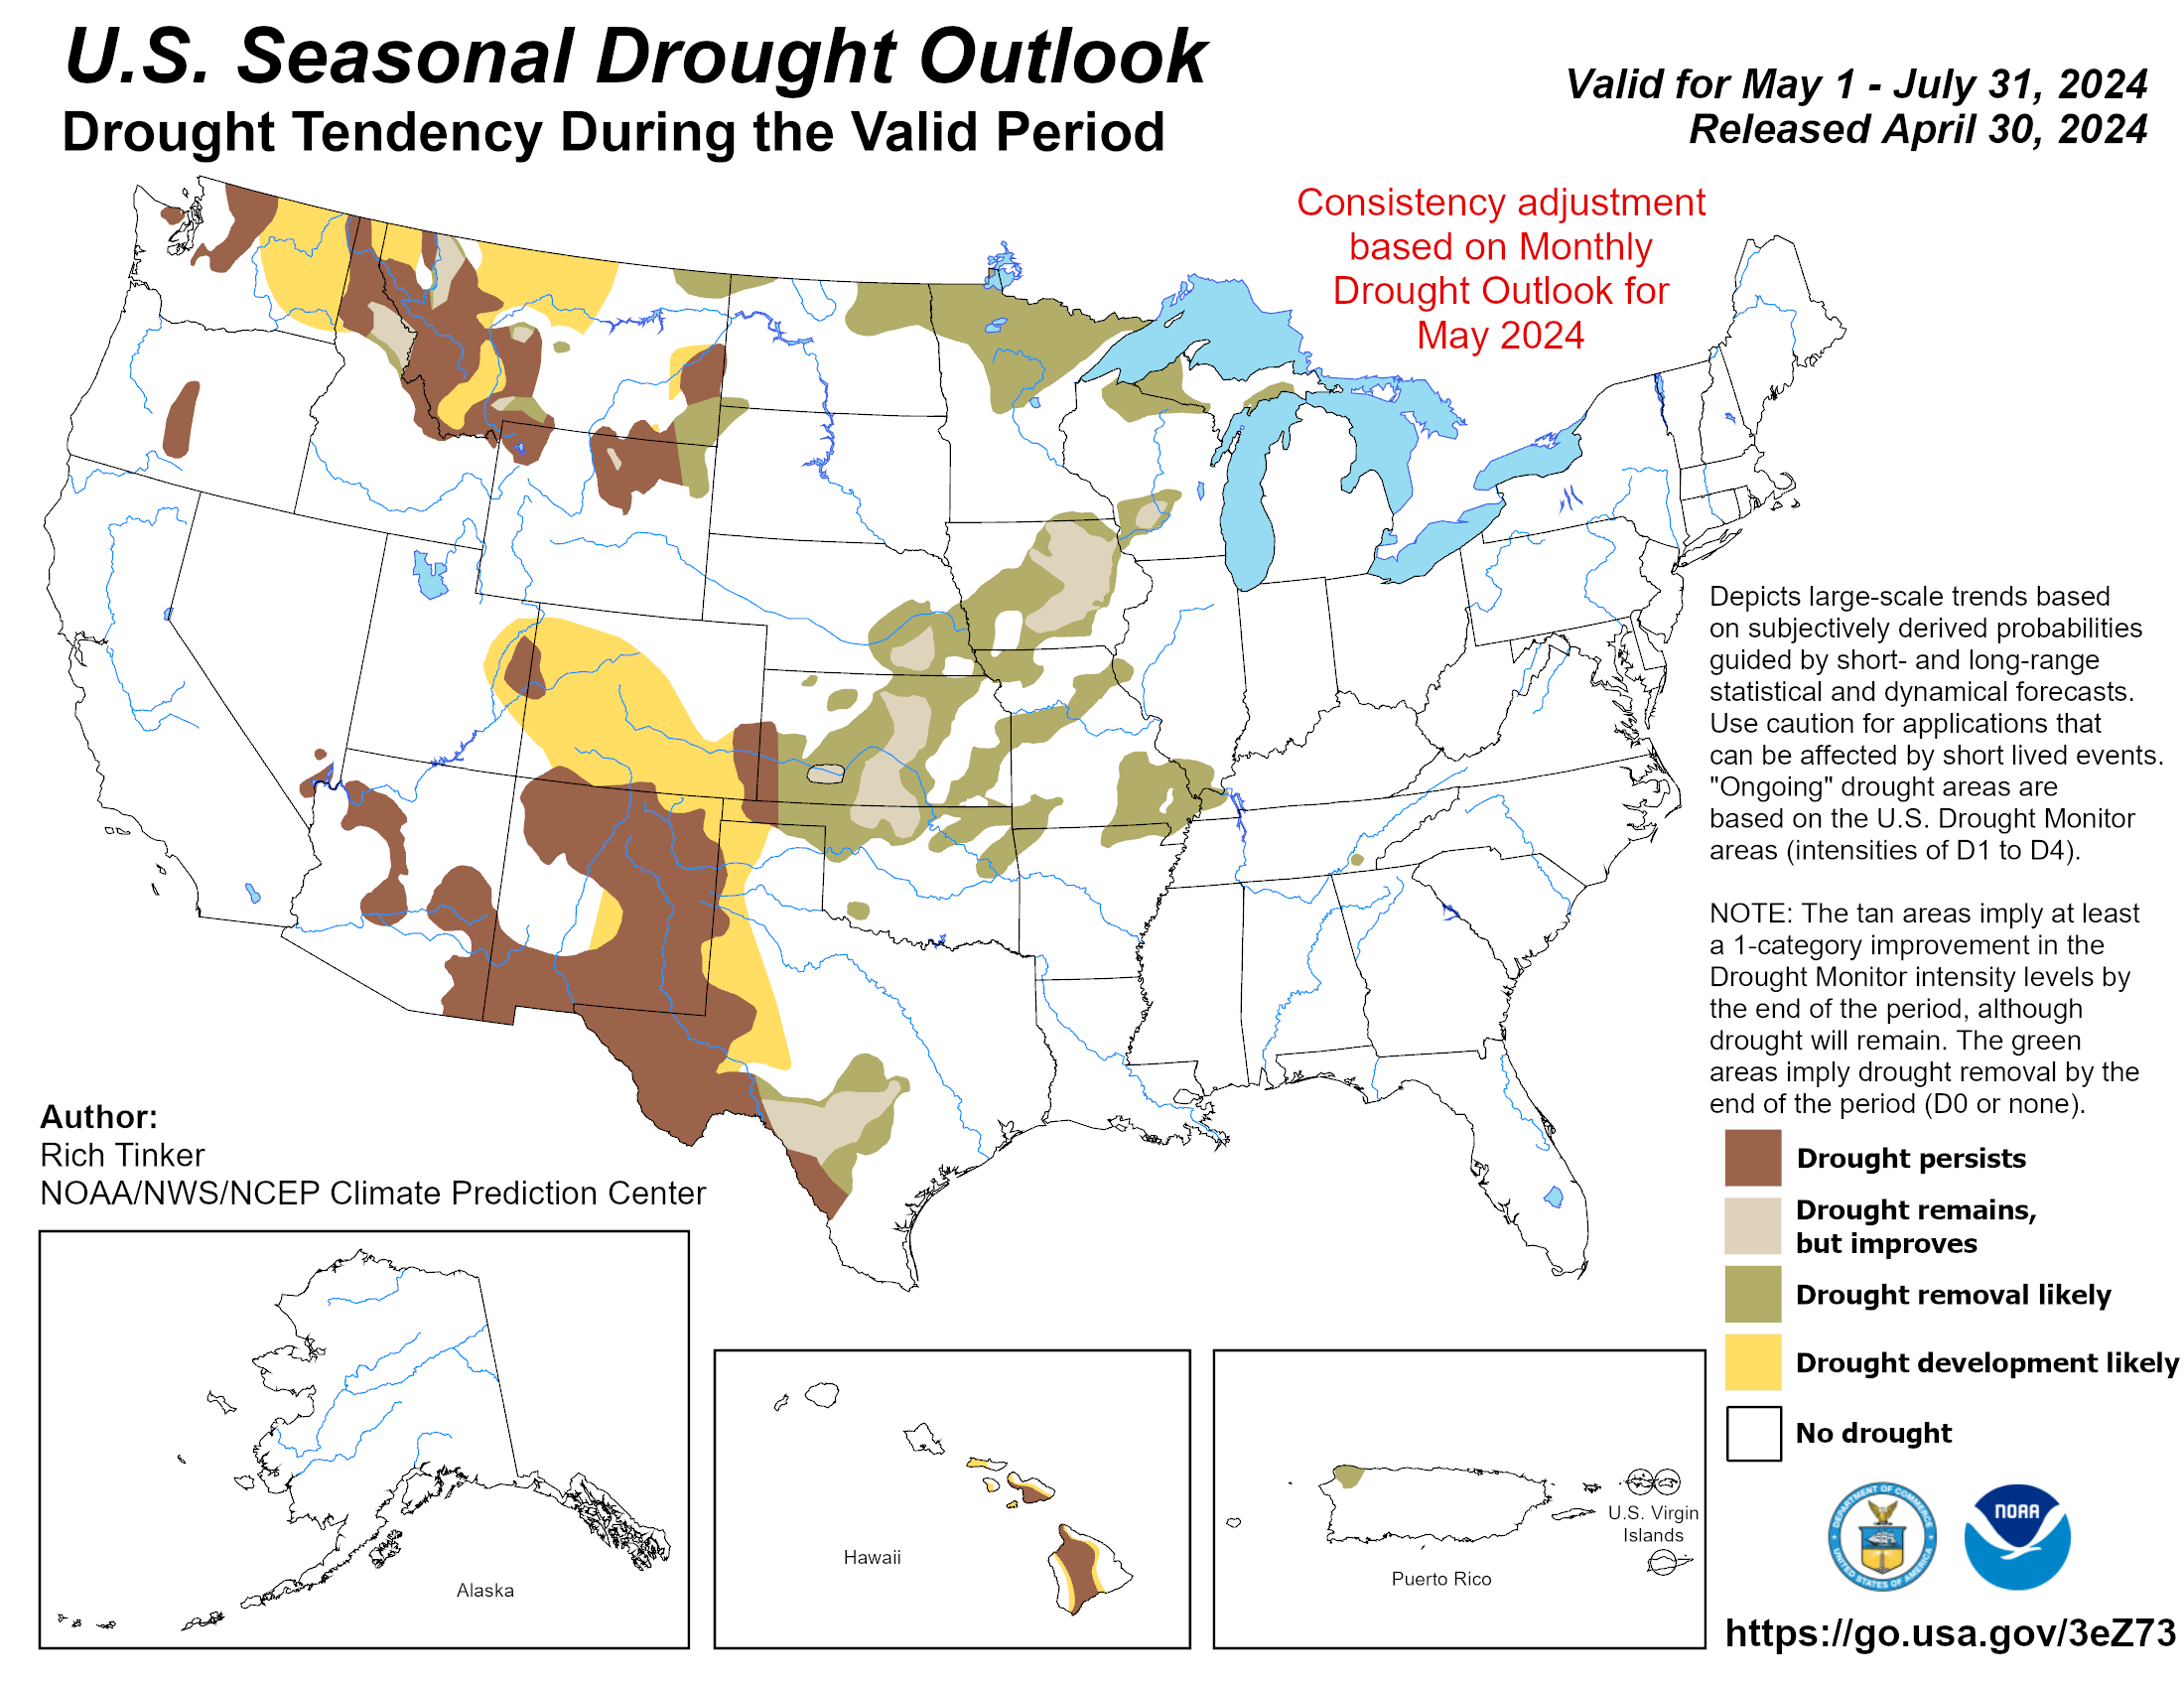 U.S. Monthly Drought Outlook